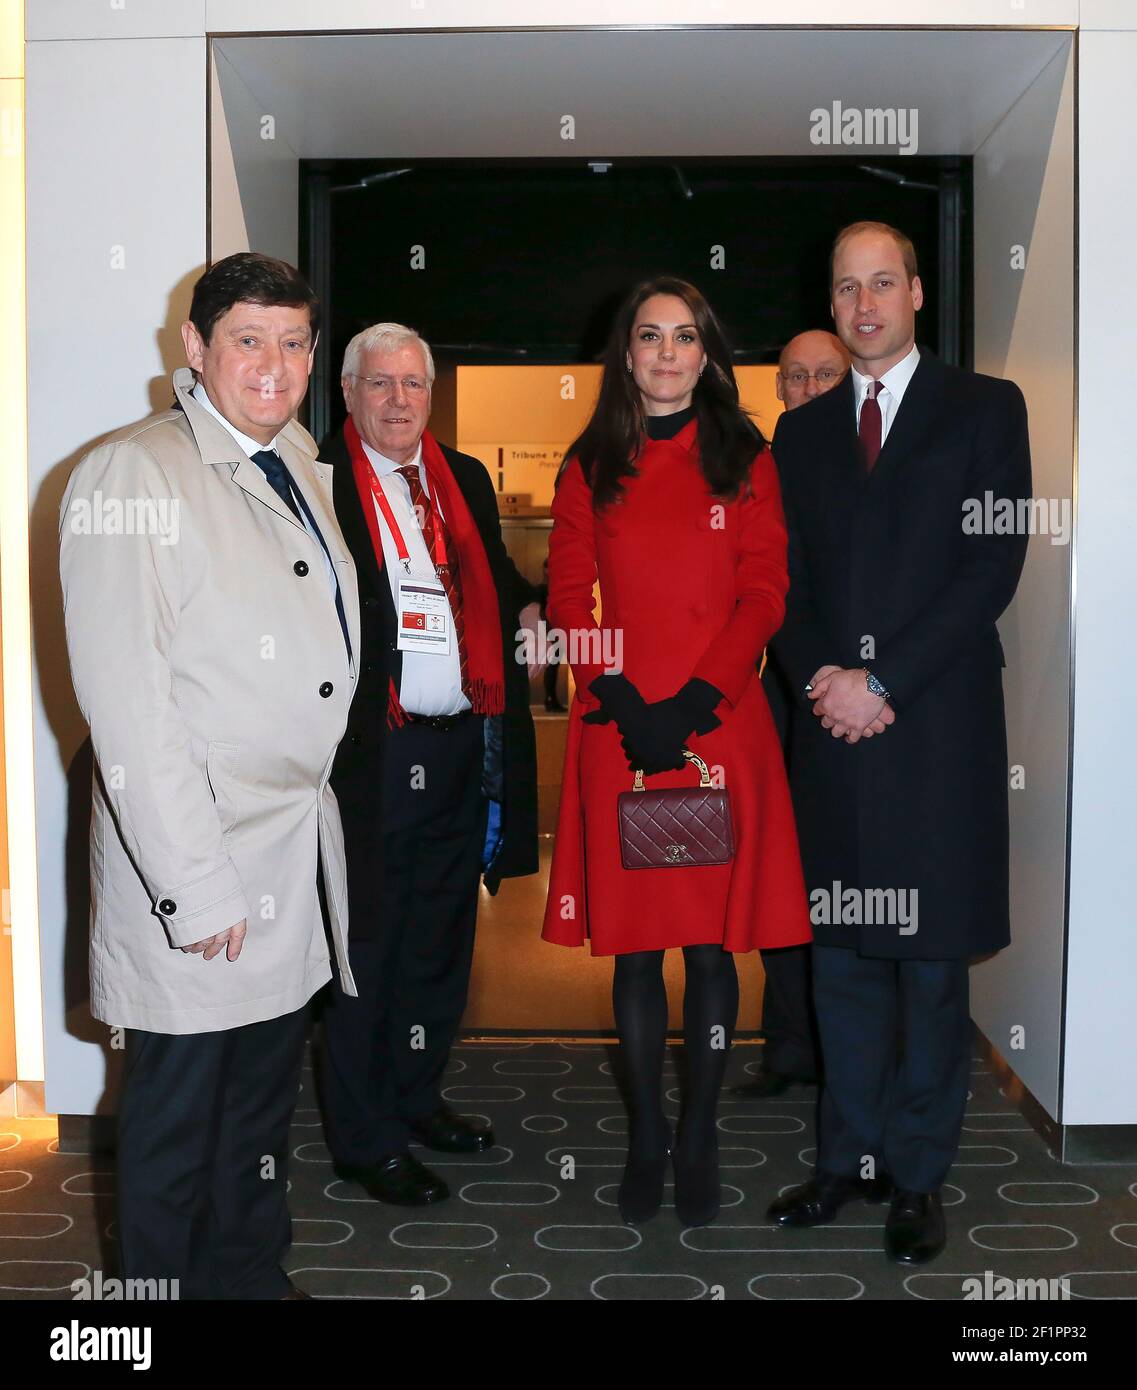 Patrick Kanner, French Minister of Urbain Affairs, Youth and Sport, Dennis Gethin, President of the Welsh Rugby Union, Catherine Elizabeth Middleton known as Kate Middleton, Duchess of Cambridge in United of Kingdom (Catherine Elizabeth Middleton dit Kate Middleton, Duchesse de Cambridge au Royaume-Uni), William Arthur Philip Louis known as Prince William, Duke of Cambridge in United of Kingdom (William Arthur Philip Louis dit Prince William, Duc de Cambridge au Royaume-Uni), Bernard Laporte (President of the french rugby federation) during the RBS 6 Nations 2017 Rugby Union match between Fran Stock Photo